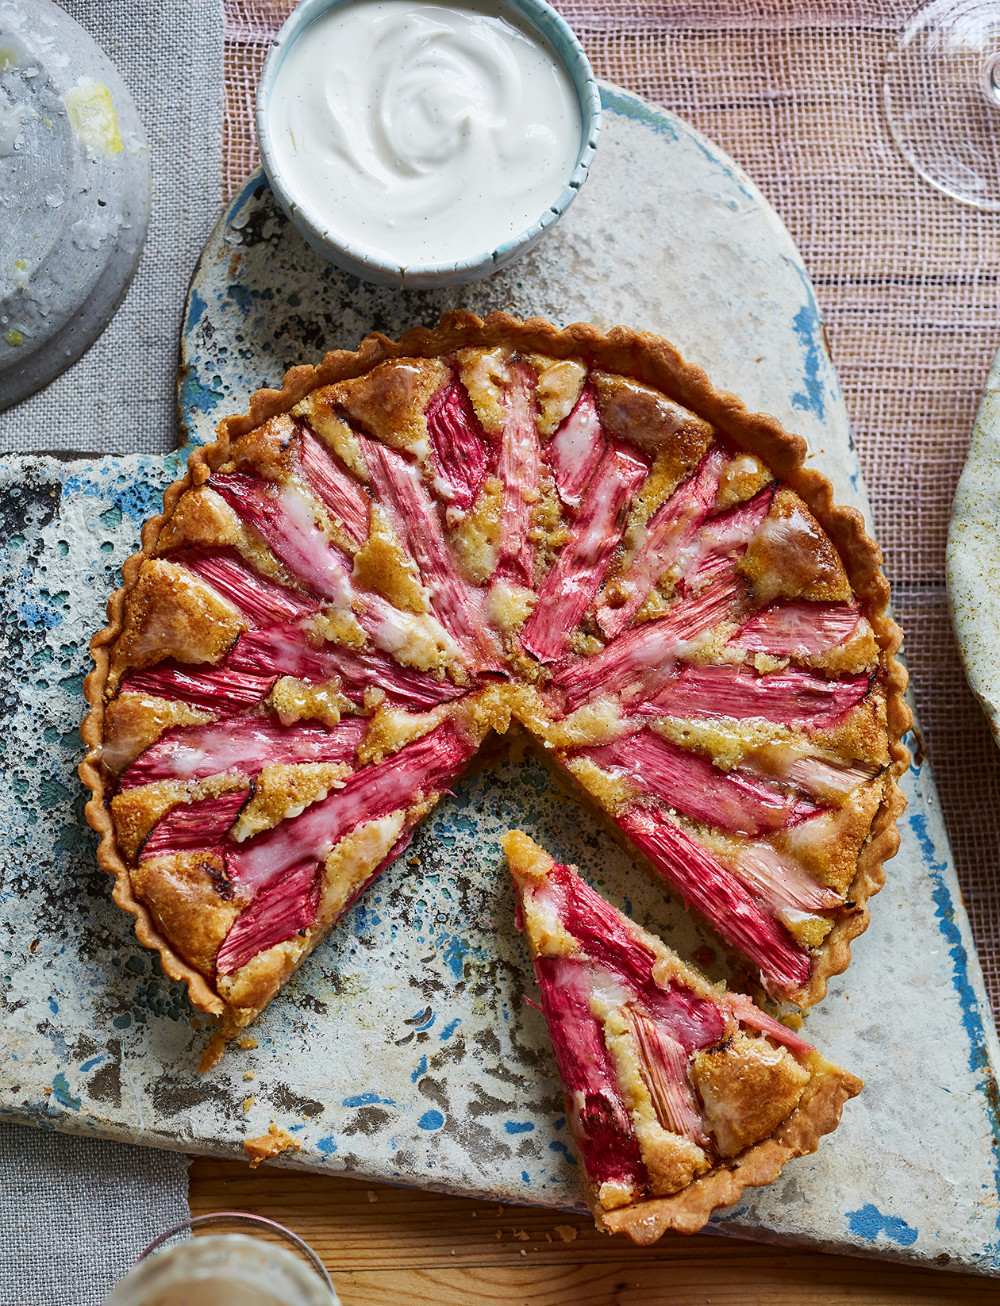 Dinner Party Desserts To Make Ahead
 Rhubarb frangipane tart Recipe With images